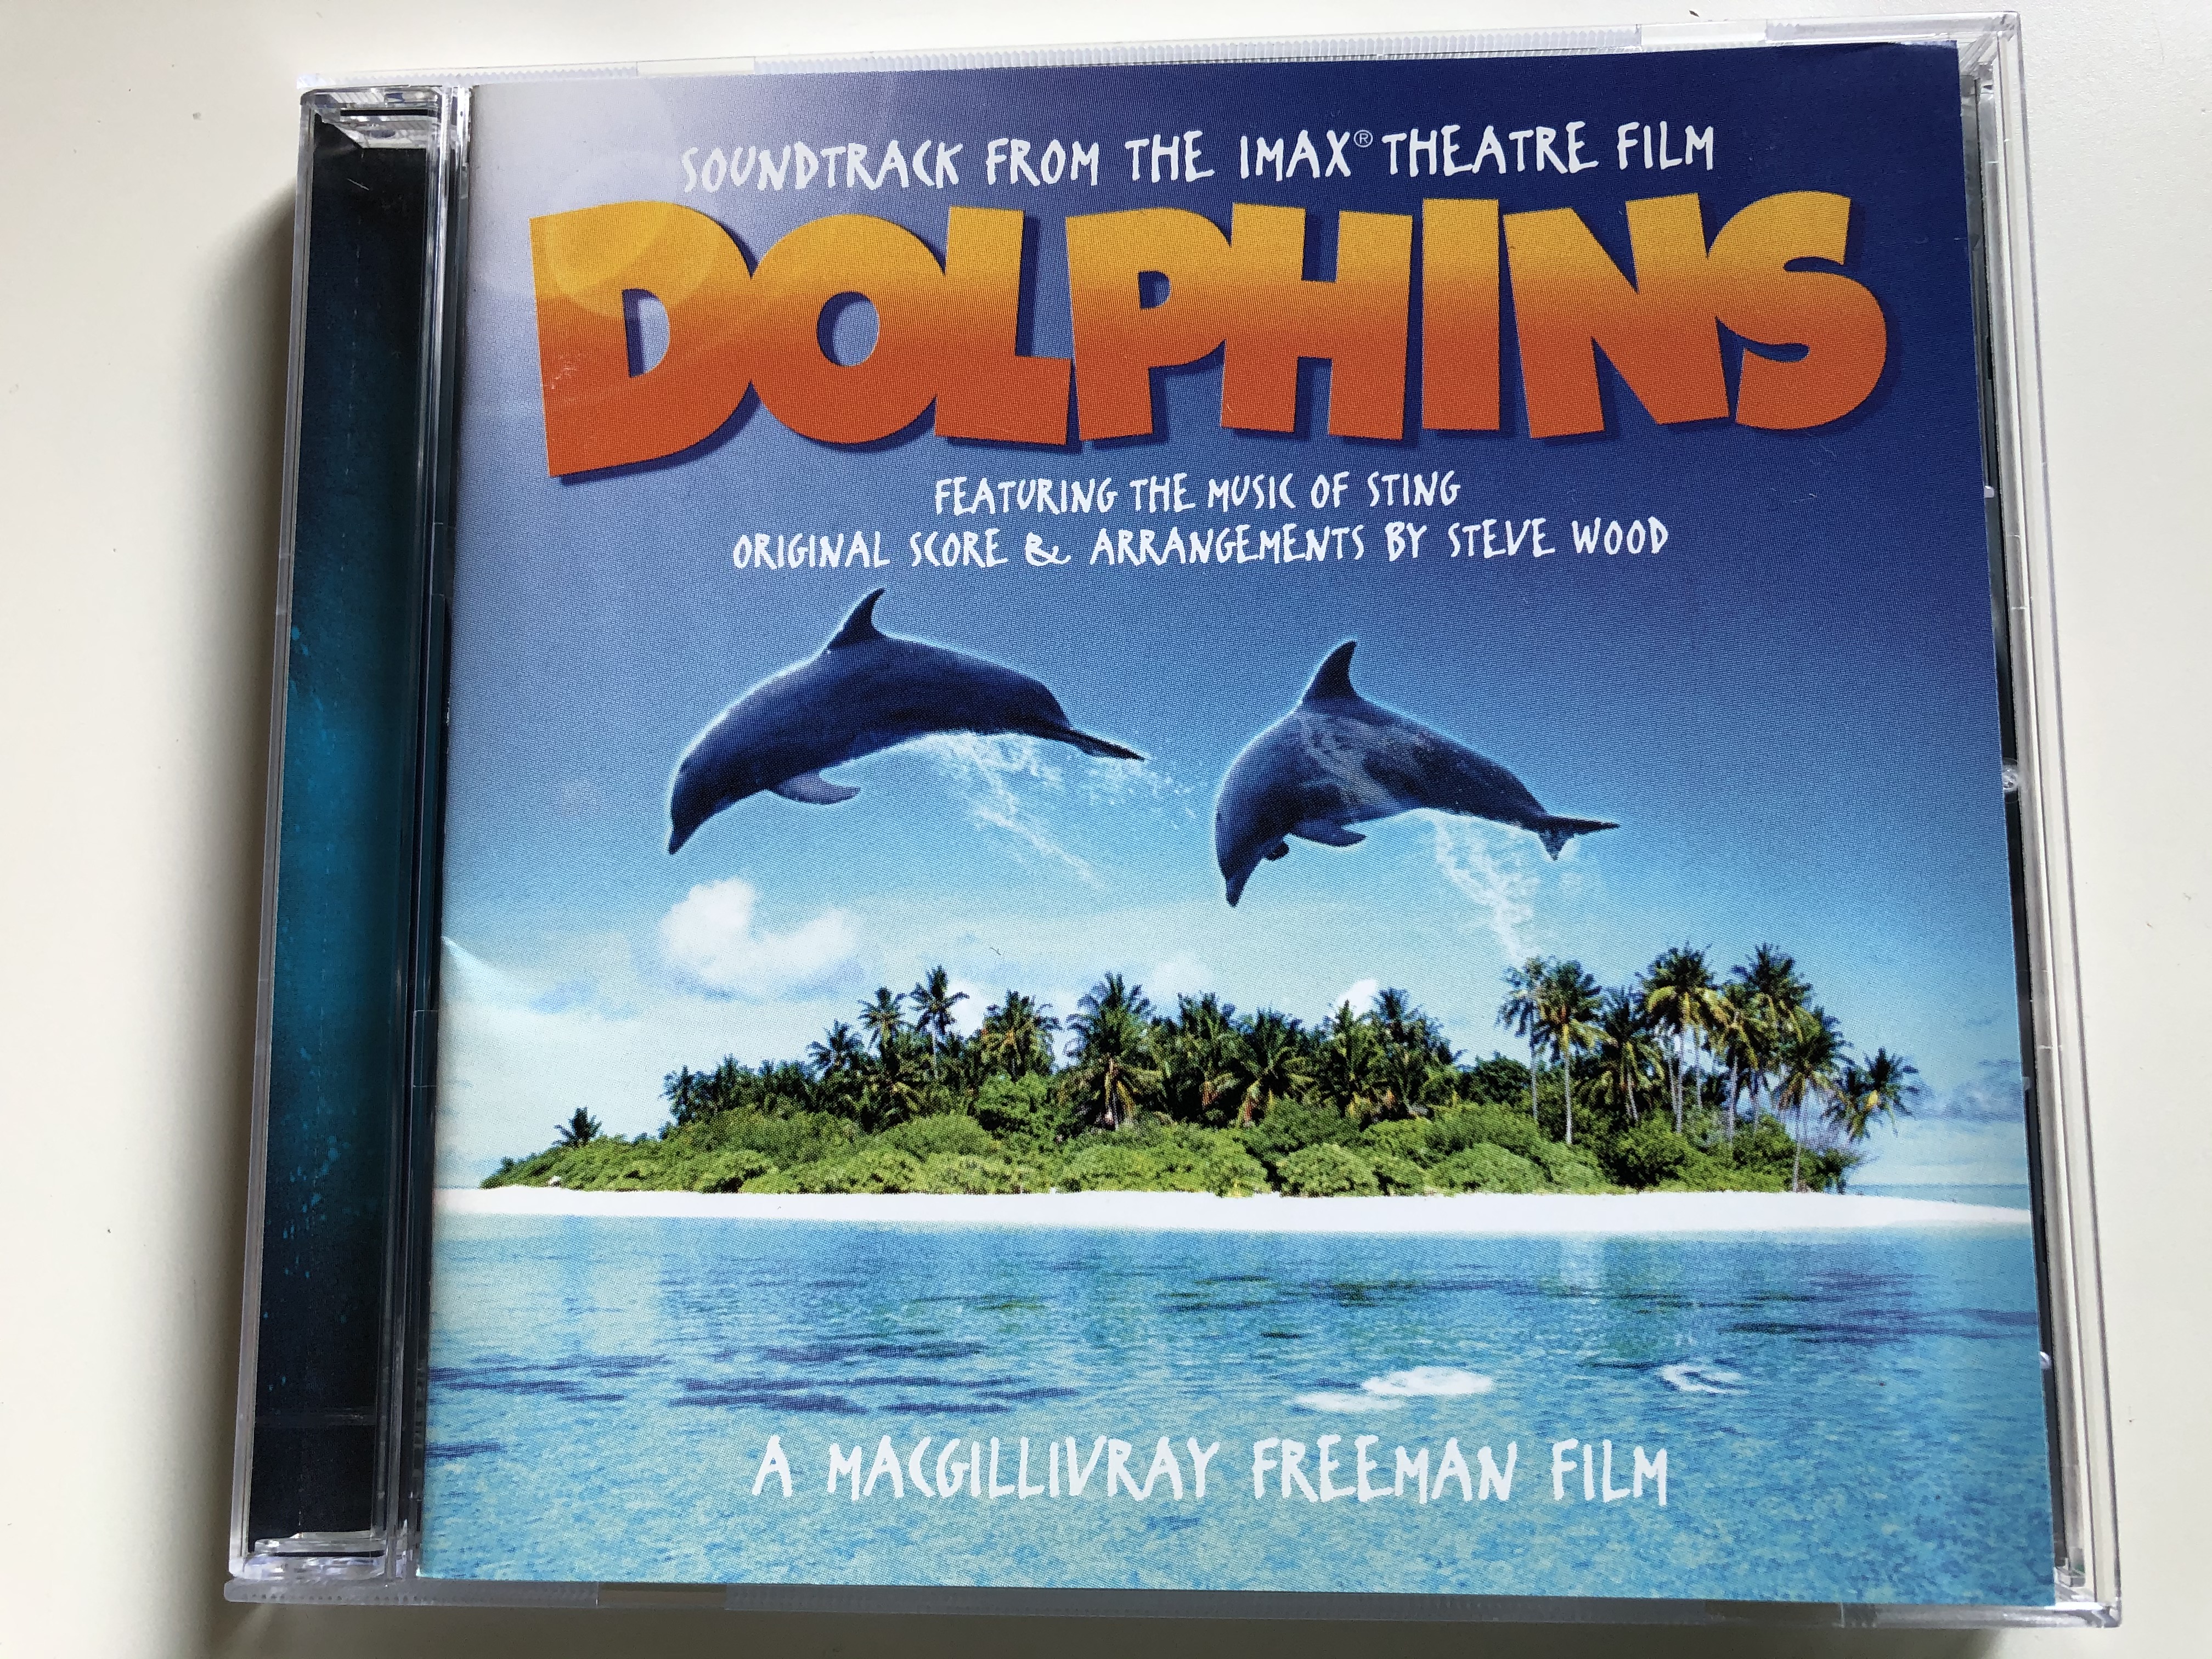 soundtrack-from-the-imax-theatre-film-dolphins-featuring-the-music-of-sting-original-score-arrangements-by-steve-wood-a-macgillivray-freeman-film-pang-a-audio-cd-2000-159-145-2-1-.jpg